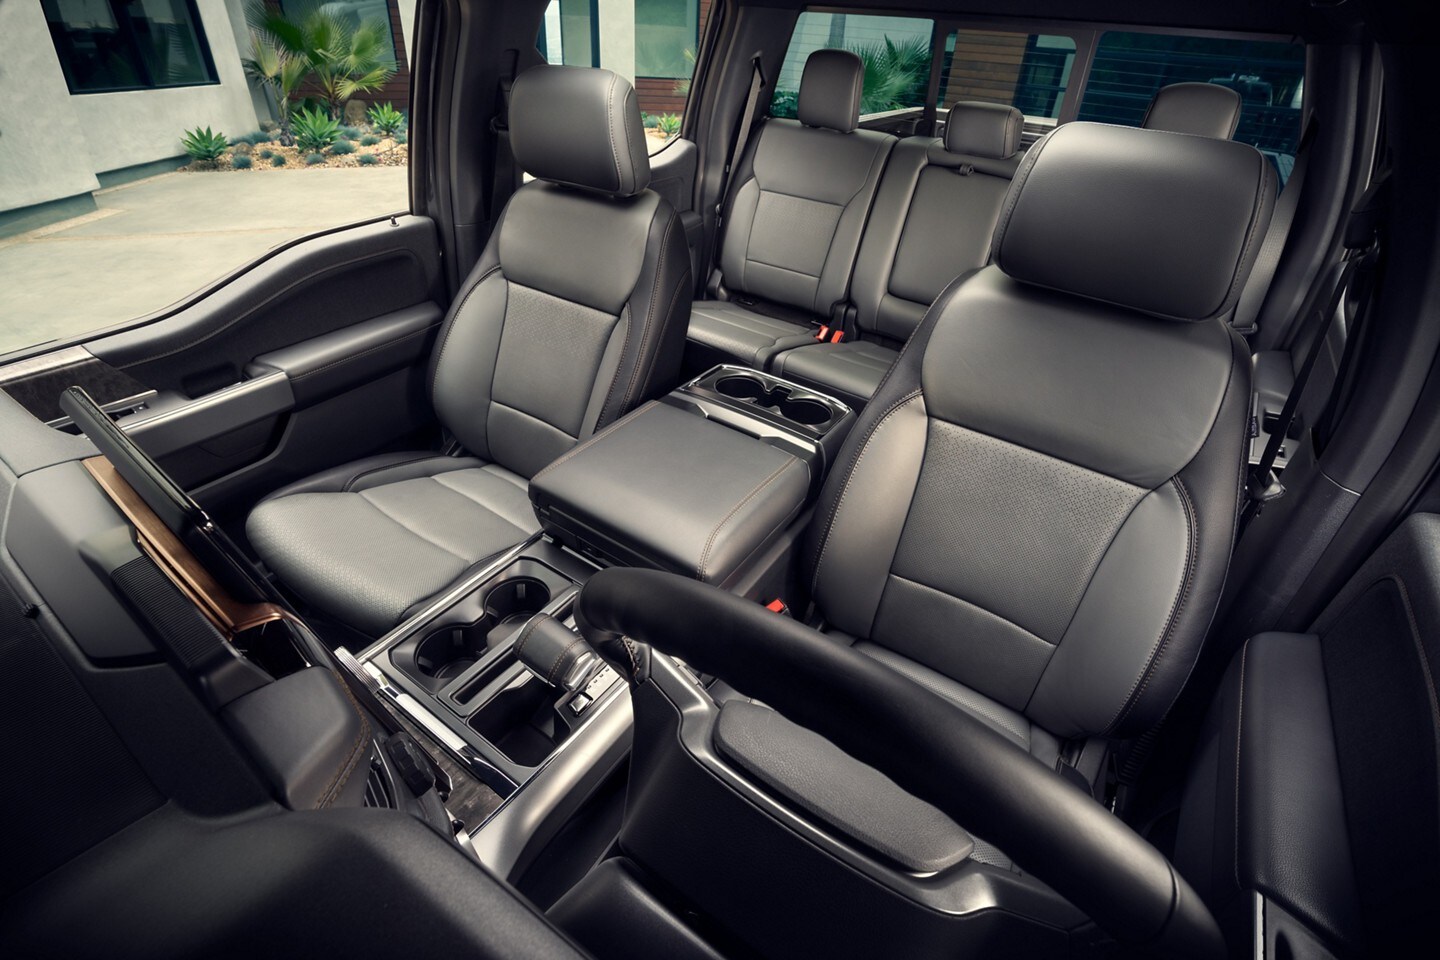 Interior of a 2022 F-150 Lightning showing its center console and spacious seating.